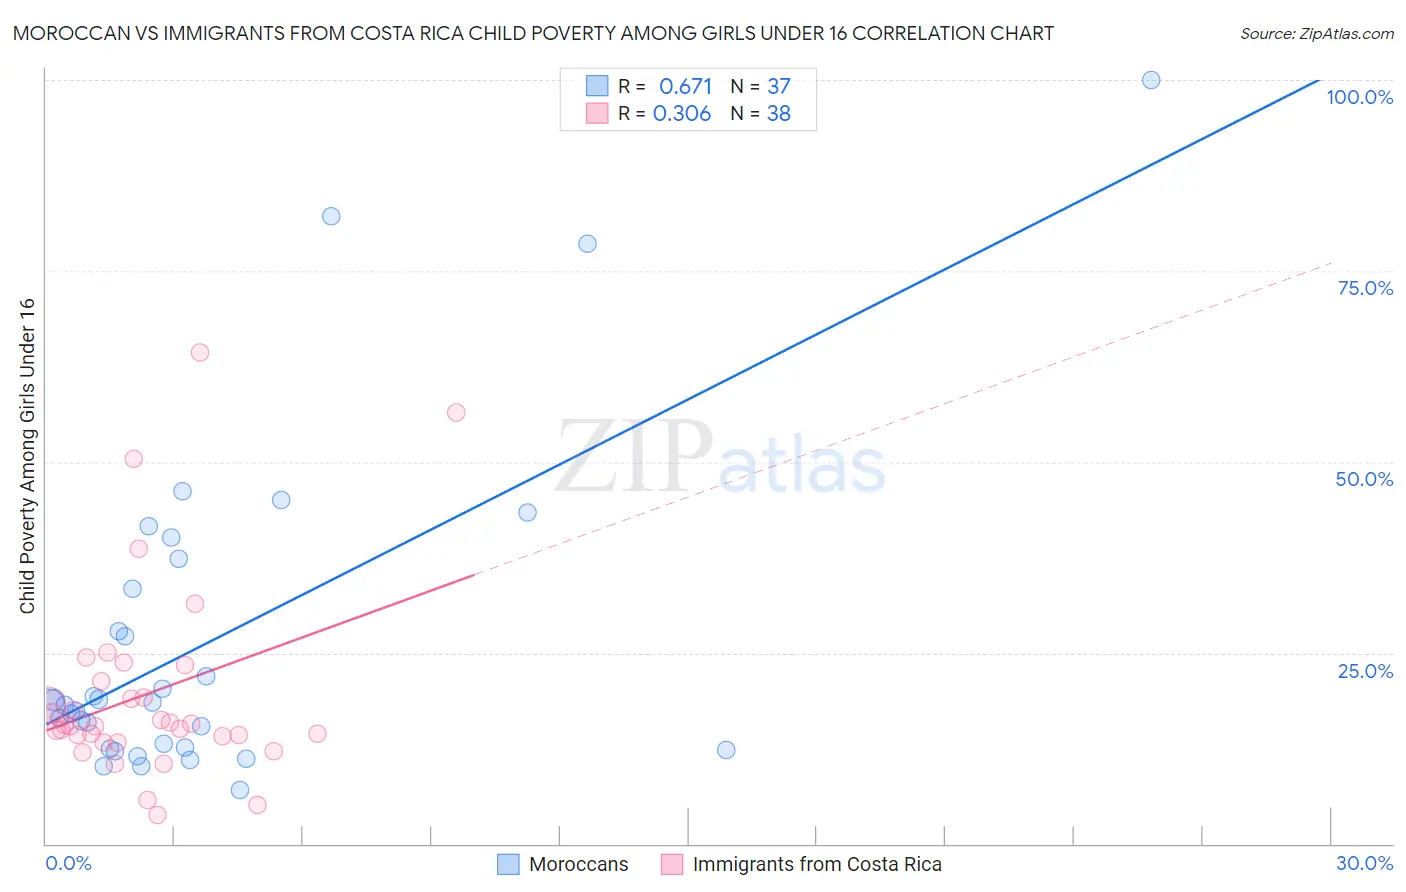 Moroccan vs Immigrants from Costa Rica Child Poverty Among Girls Under 16